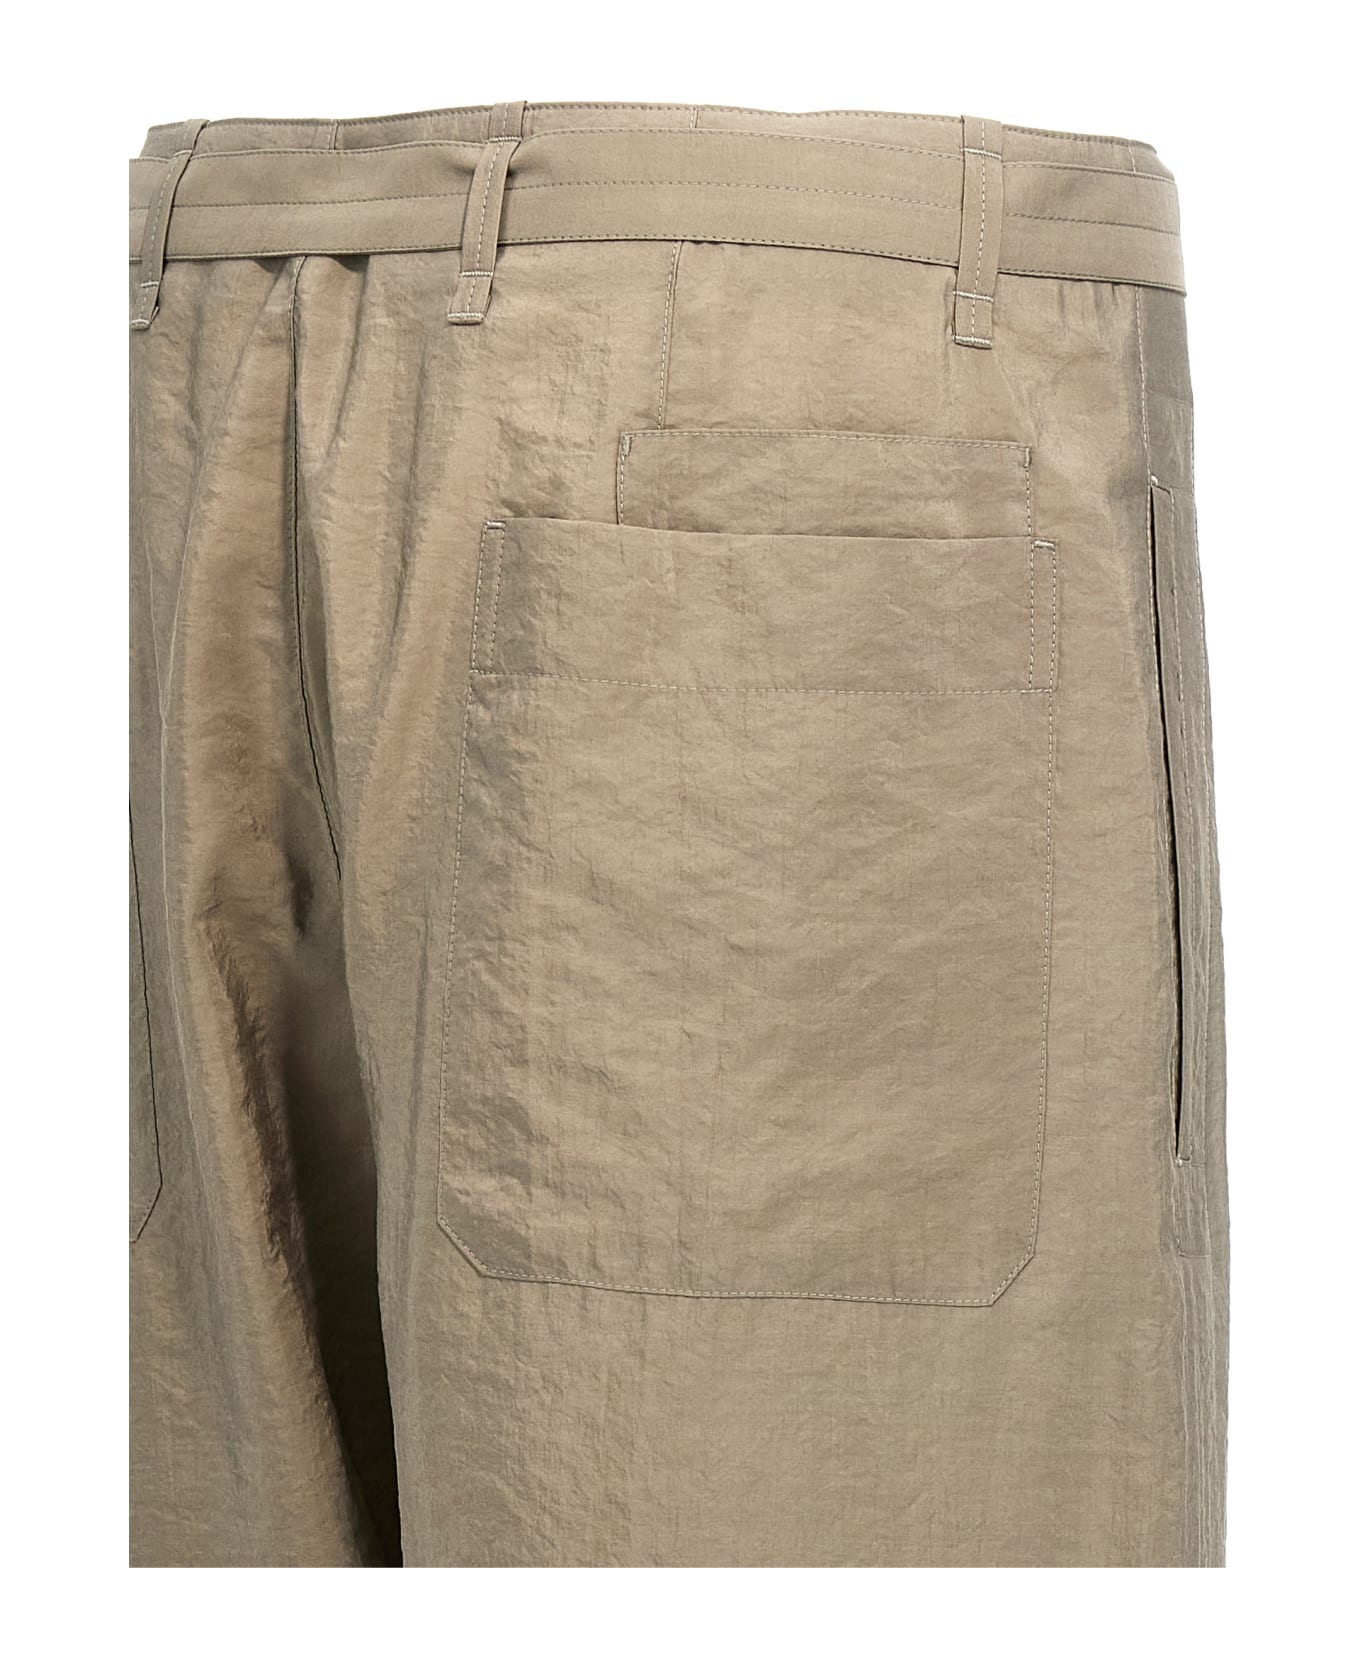 Lemaire 'seamless Belted' Trousers - Gray ボトムス